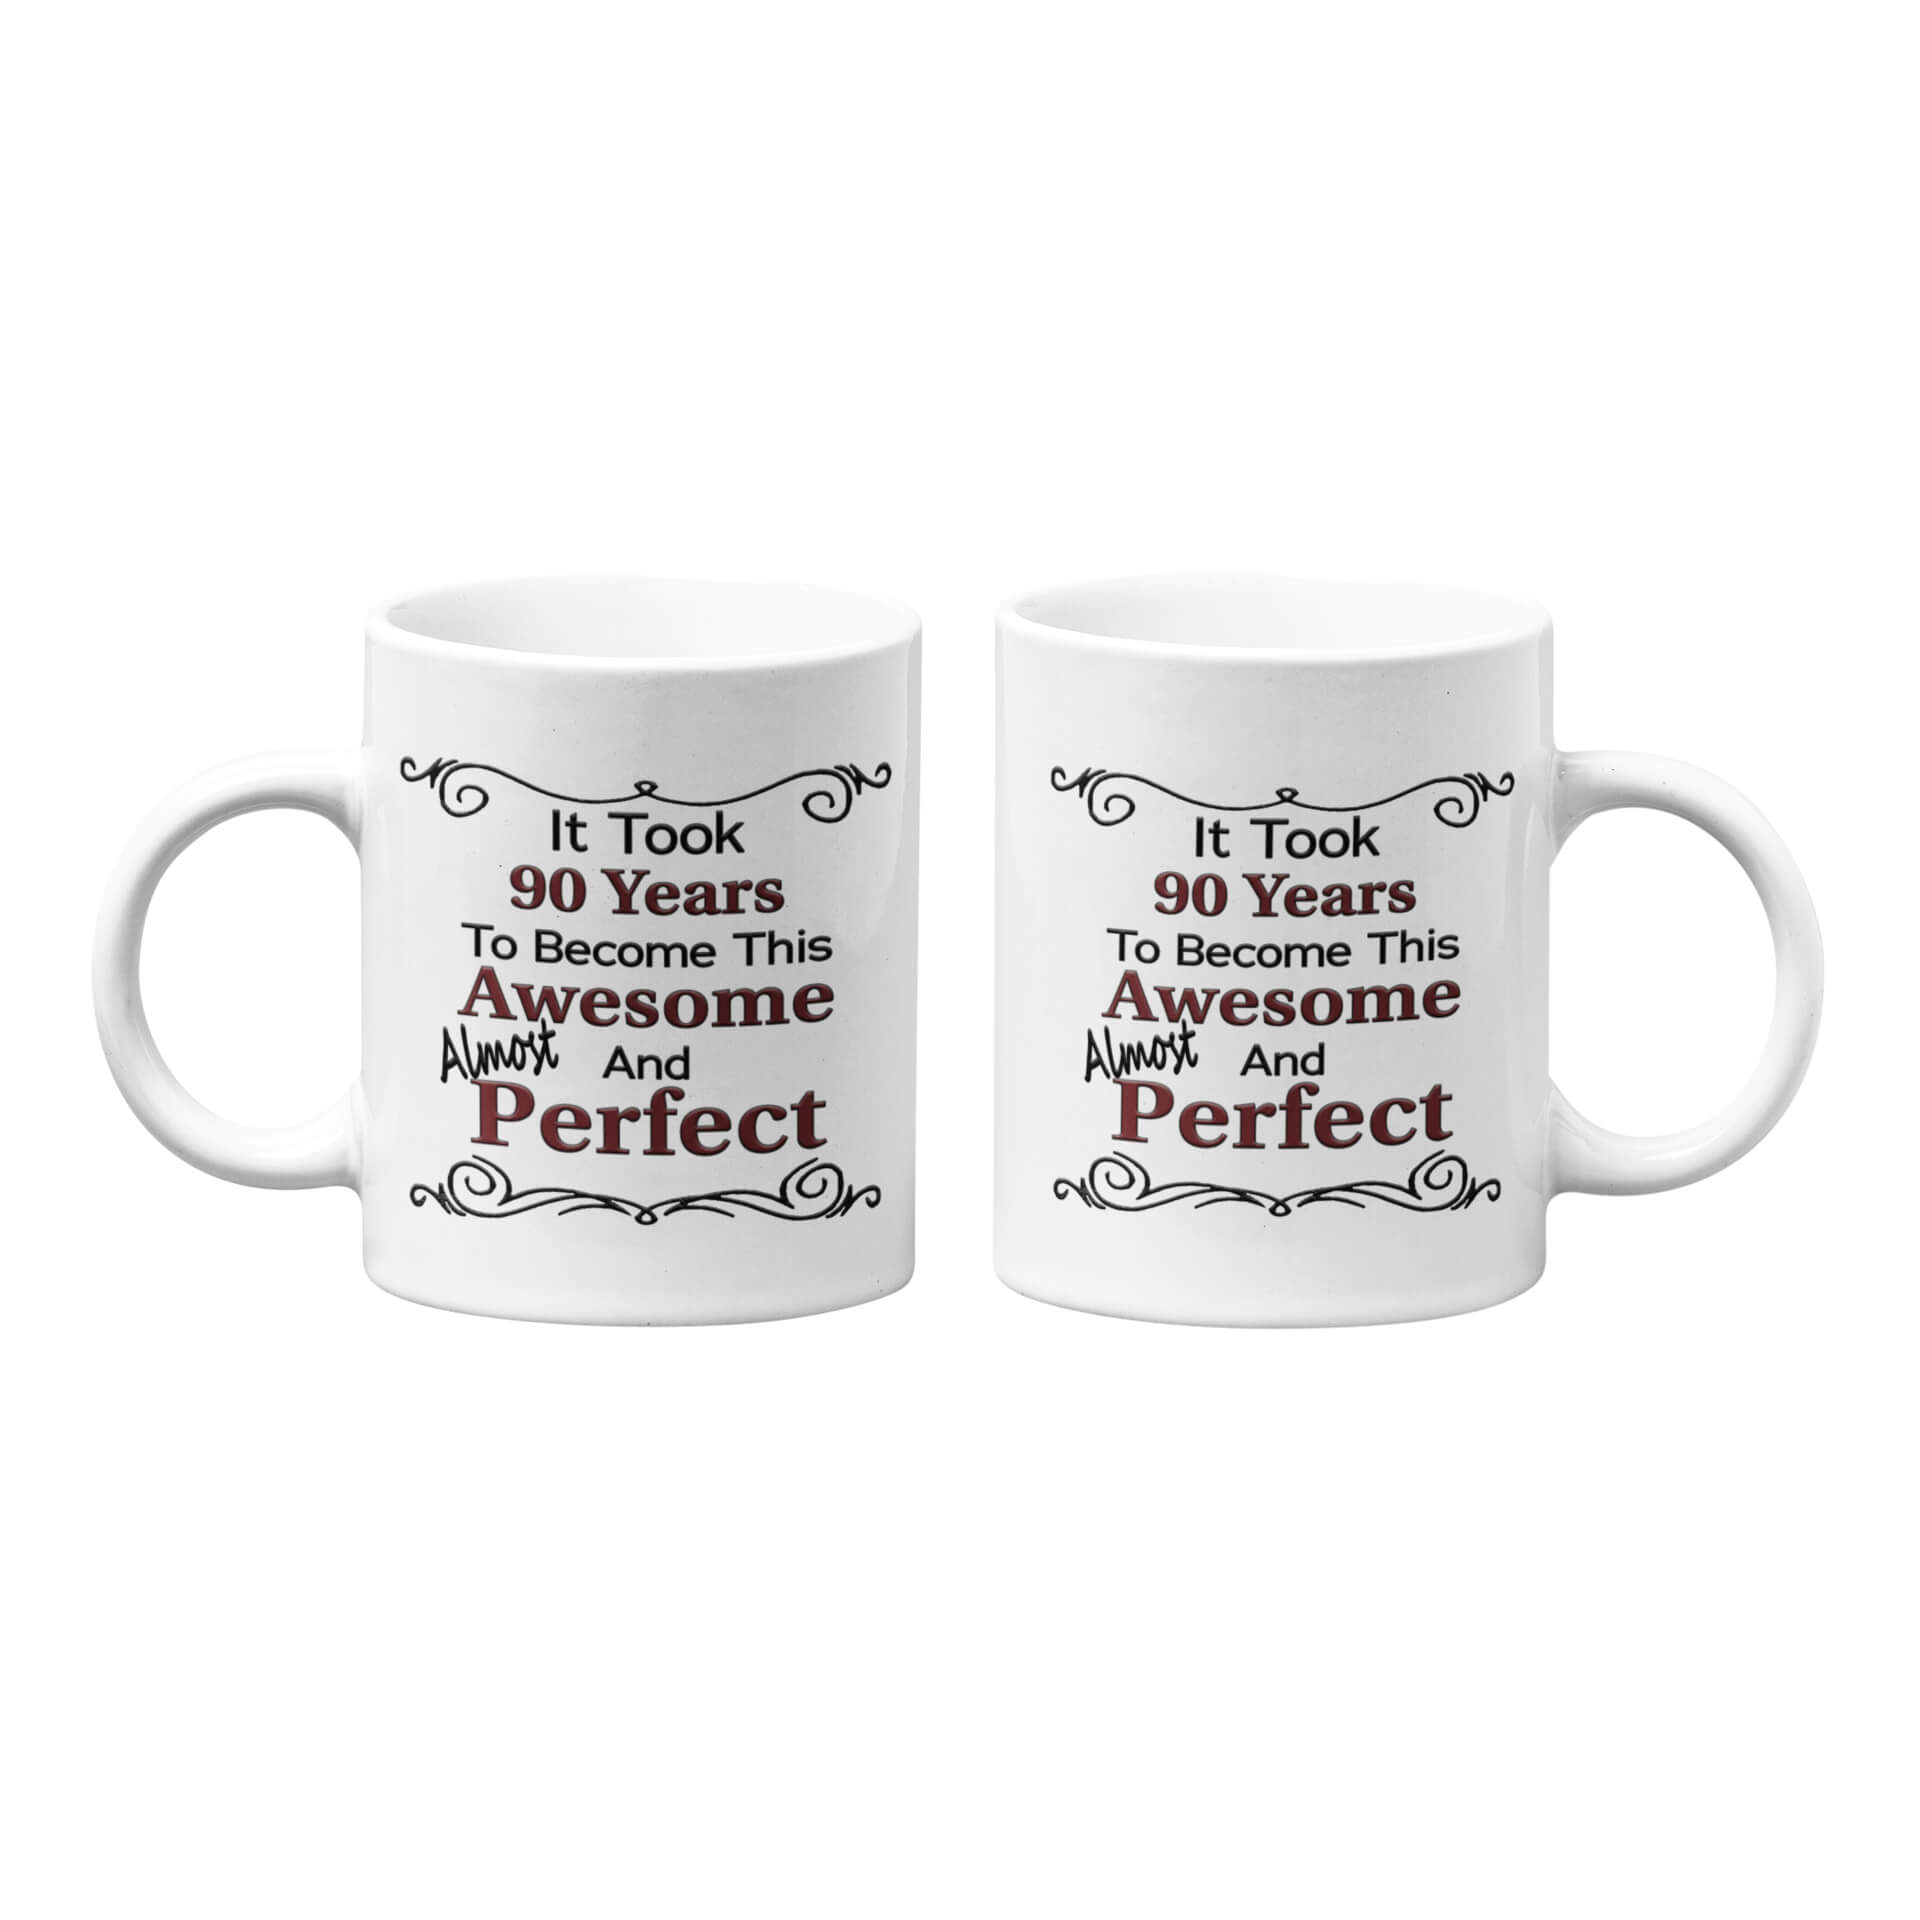 It Took X Num Years To Become This Awsome and Almost Perfect Mug